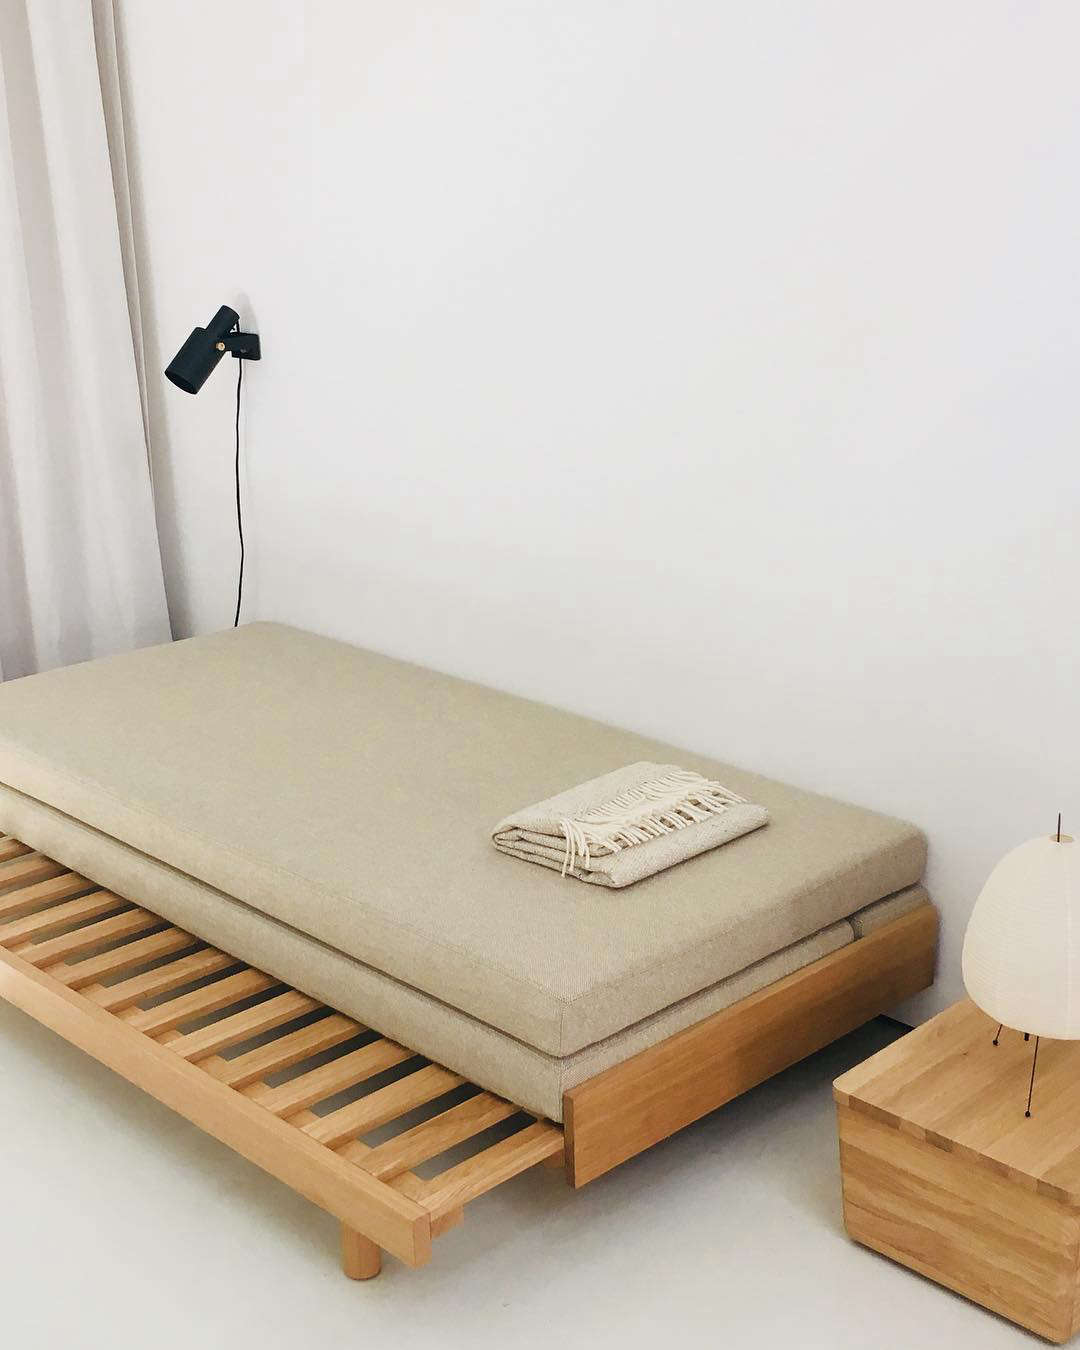 10 easy pieces: grown up guest beds 13